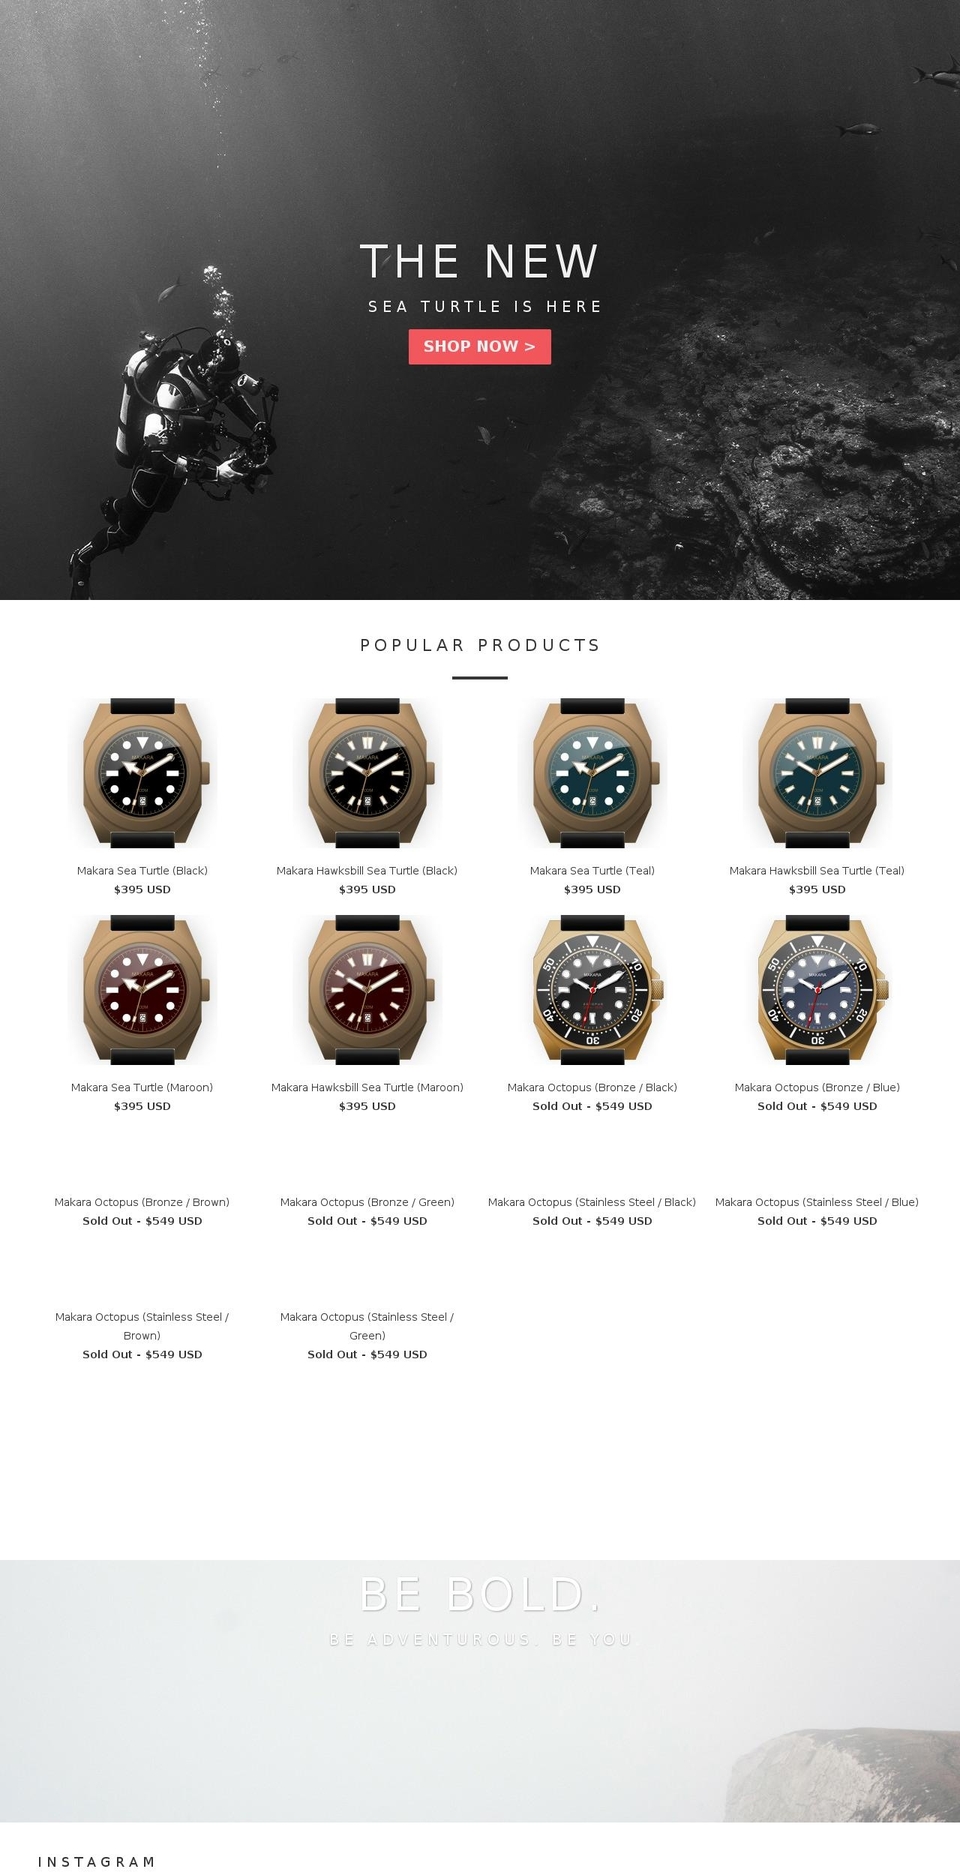 Parallax Shopify theme site example makarawatches.com